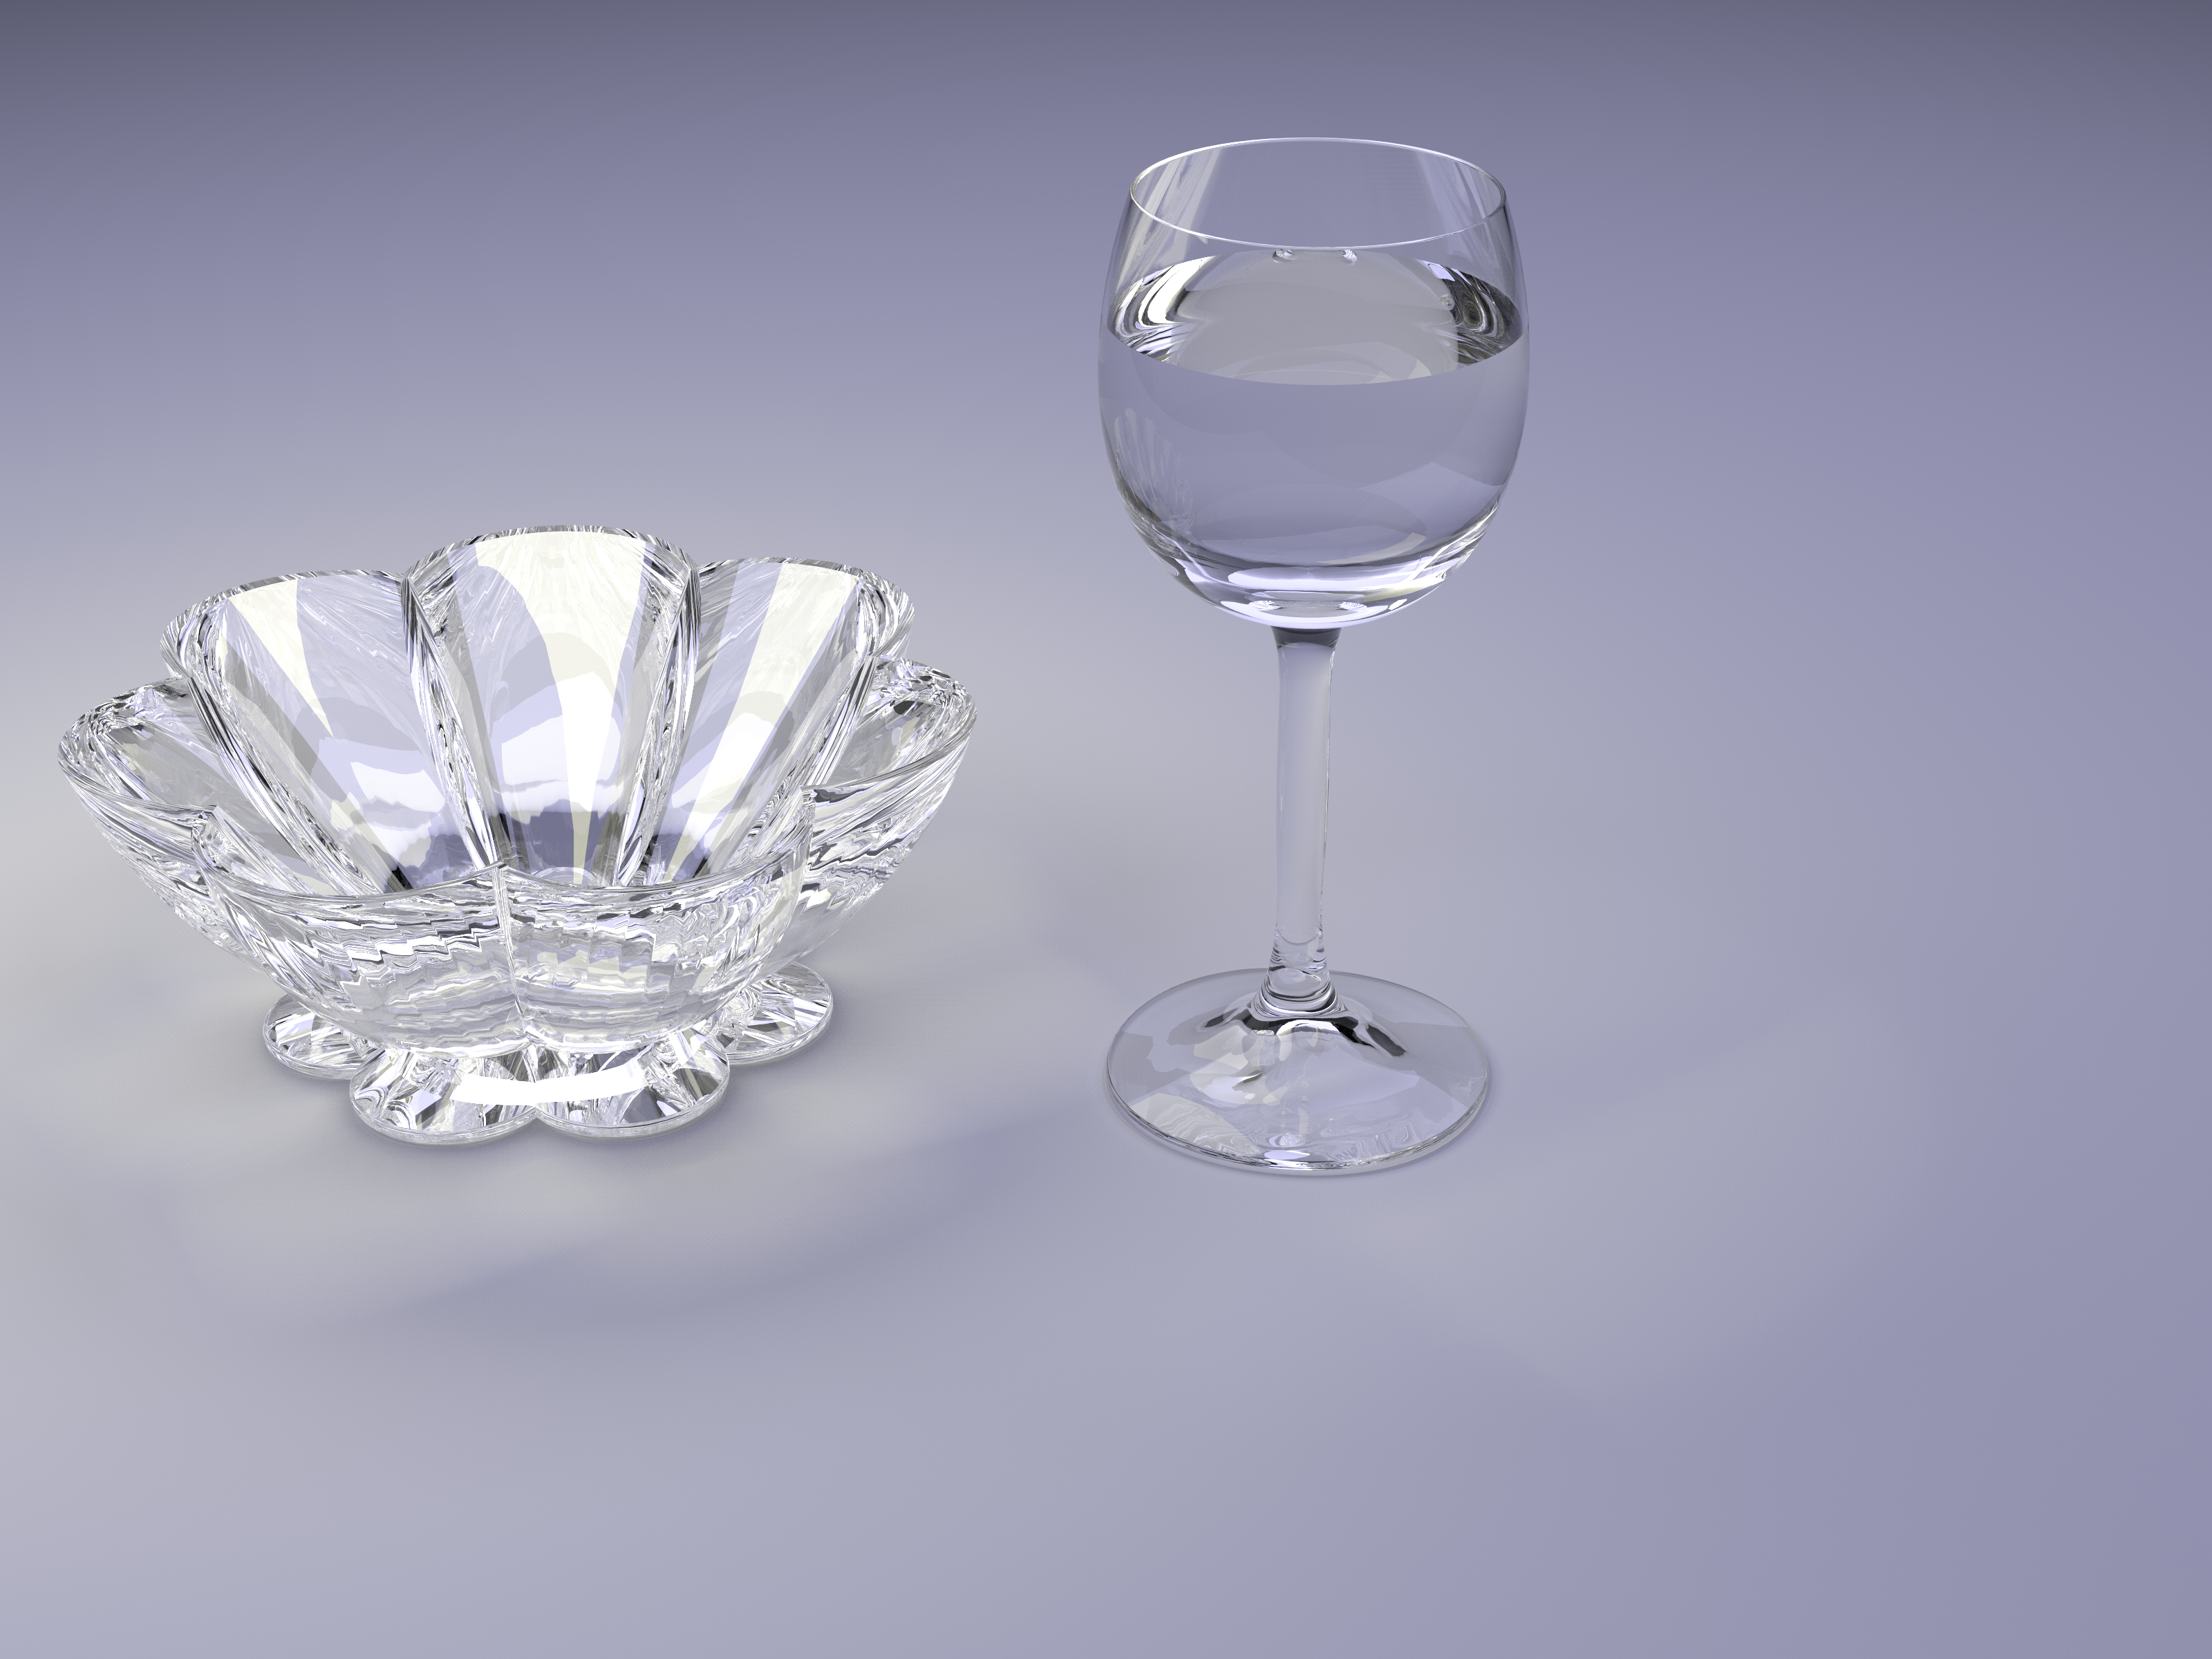 Diamond Bowl and Glass with multiple soft lighting